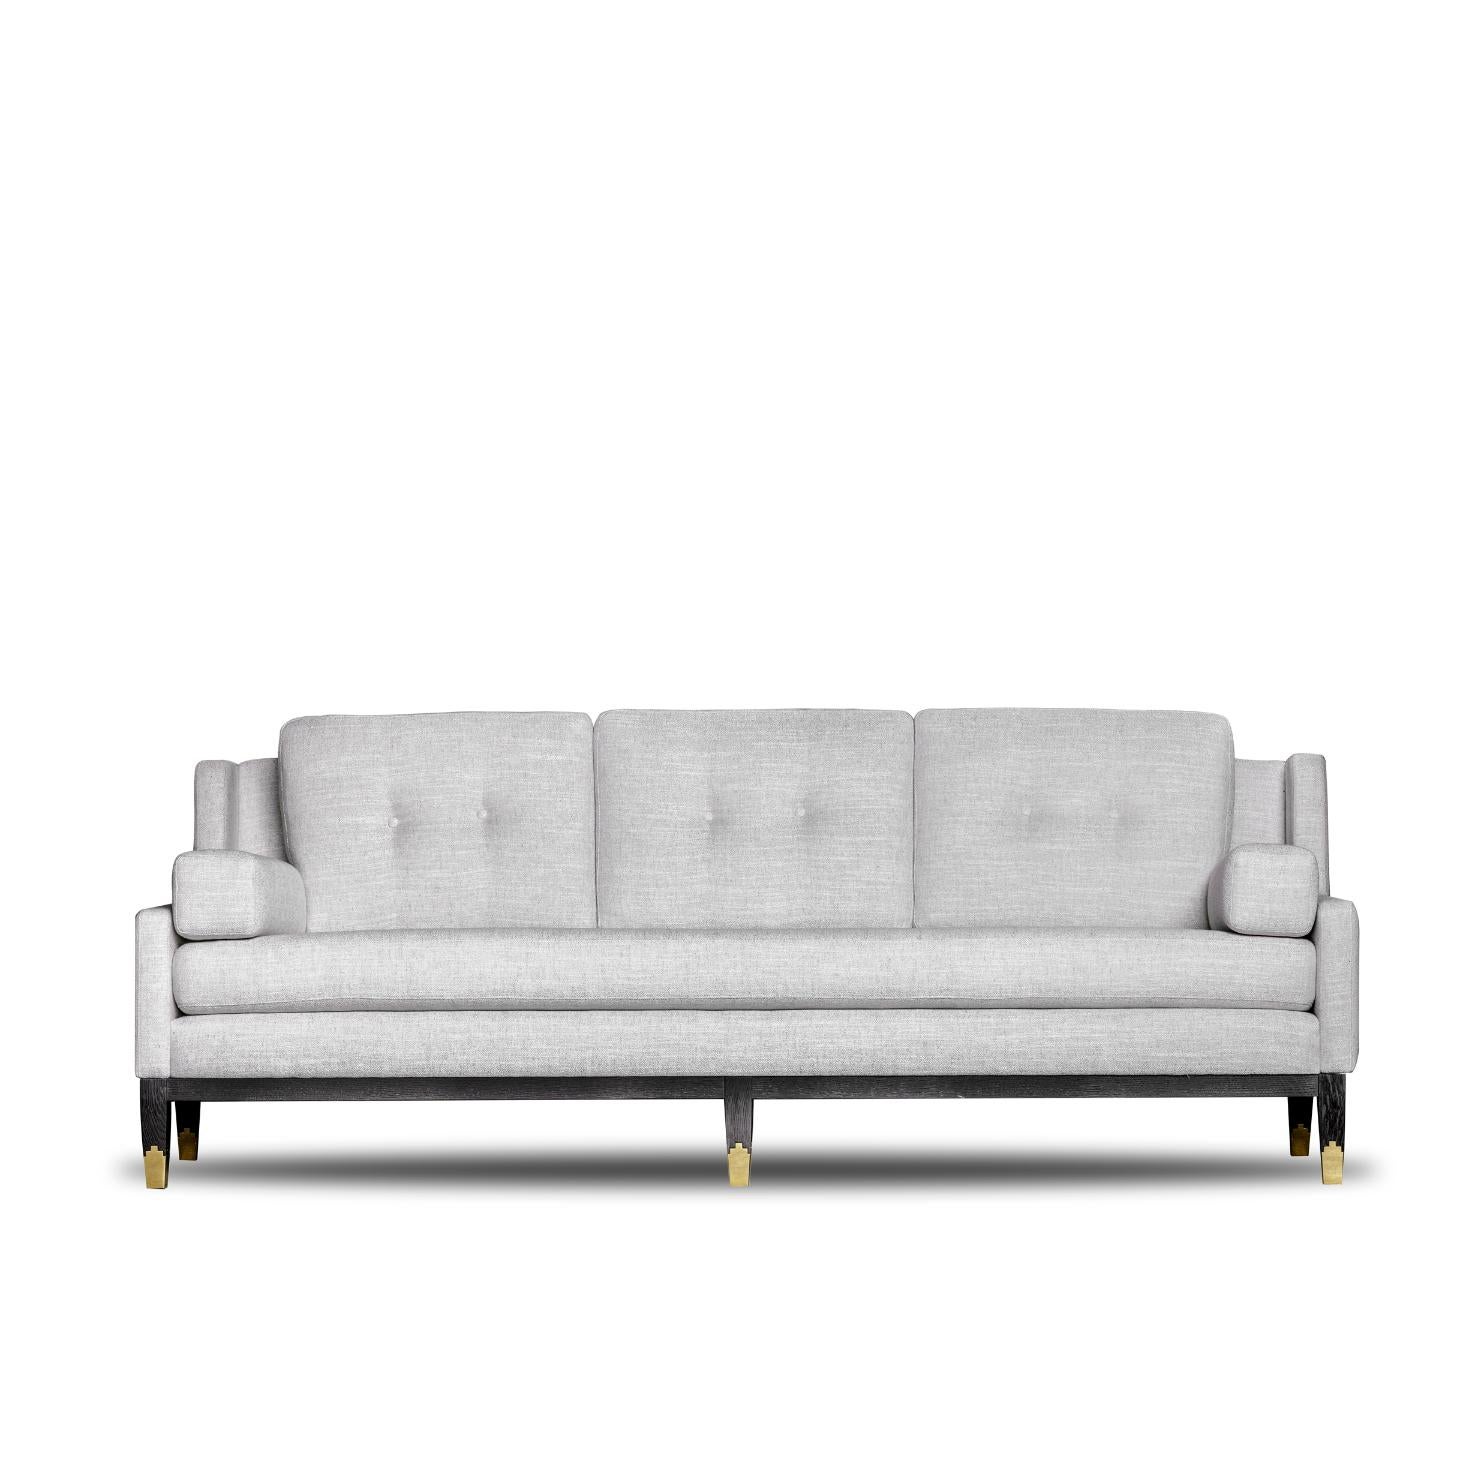 Mr Jones Sofa by DUISTT 
Dimensions: W 222 x D 92 x H 80 cm
Materials: Duistt Fabric, Natural Limed Oak, Brass

MR. JONES sofa is a piece with classical influence with sleek design and details. It fits perfectly in classic and modern interiors. The